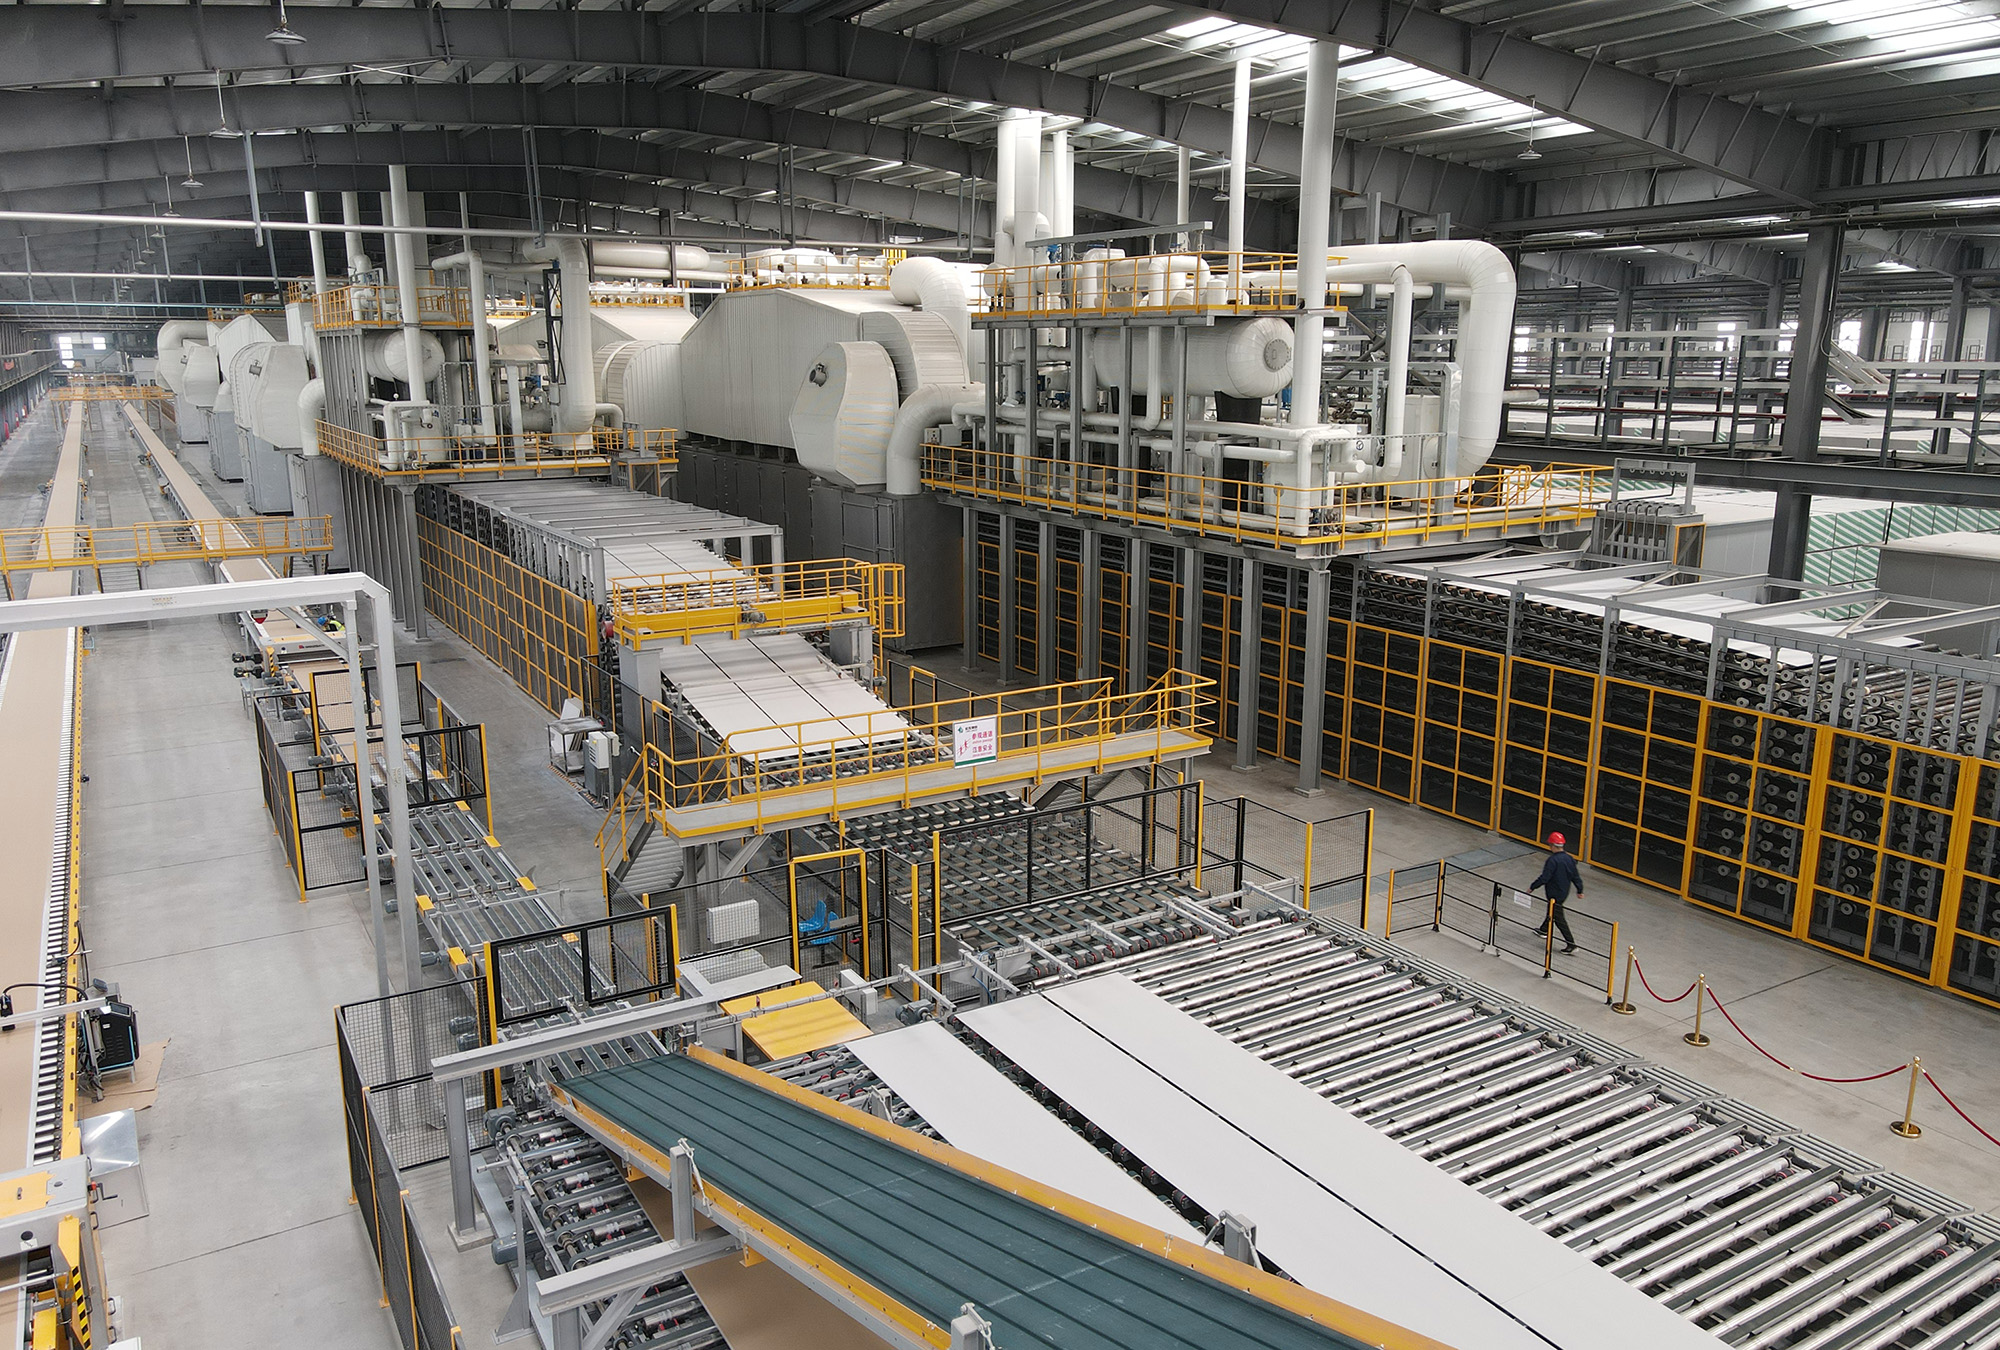 XINFA and Grenzebahc set new standards in gypsum plasterboard production